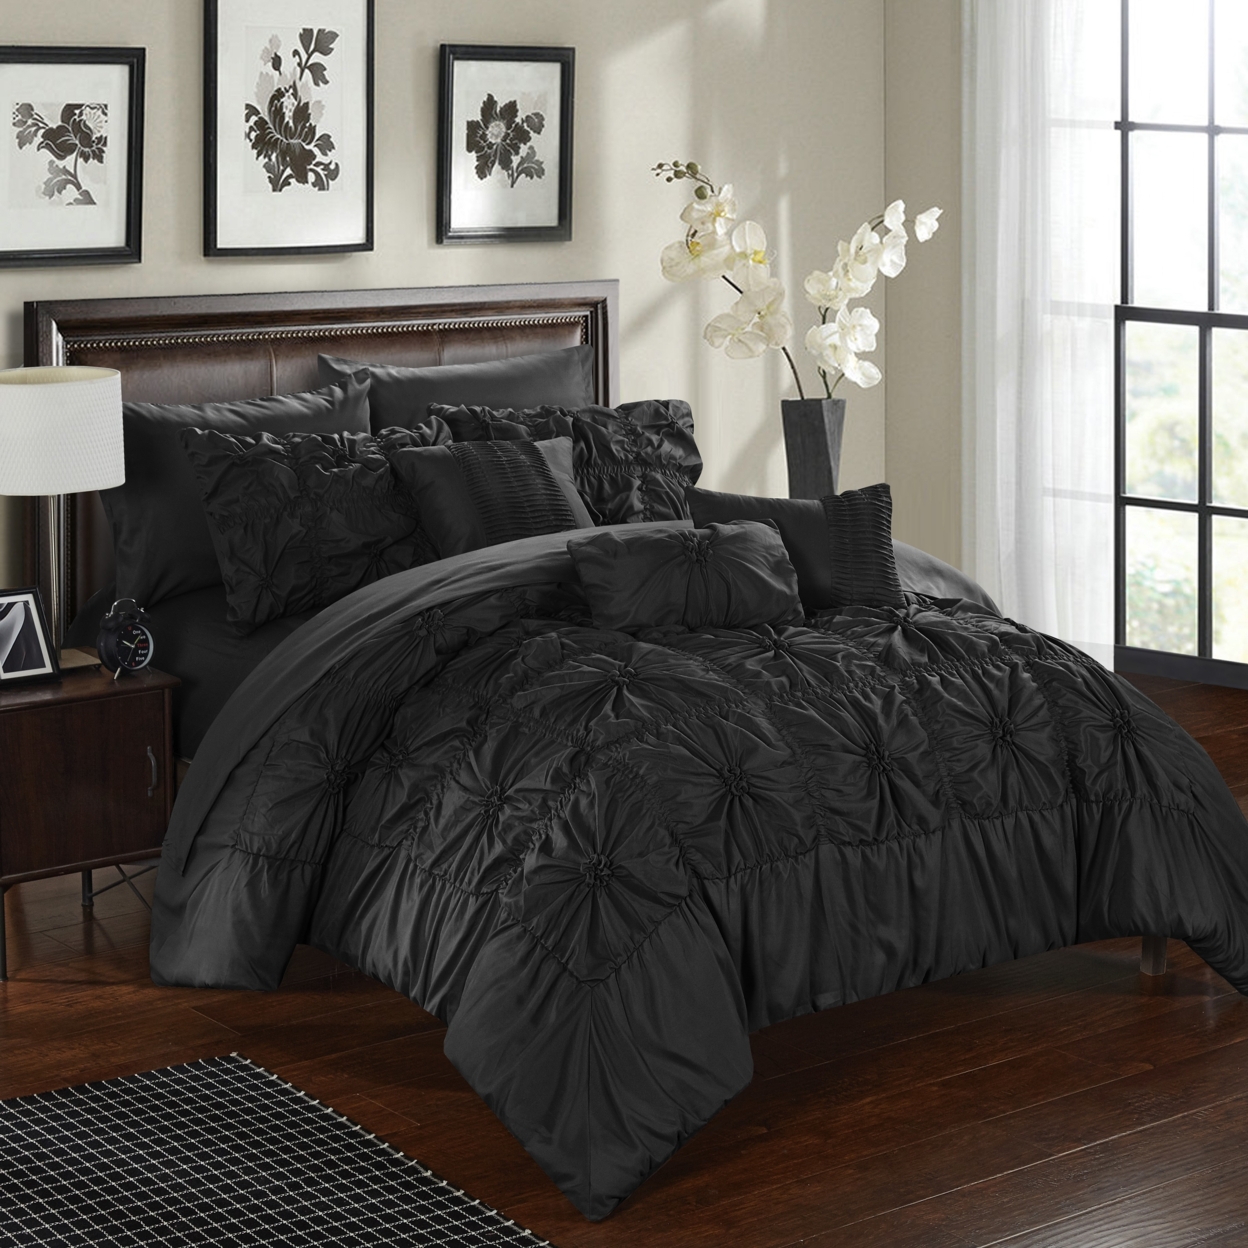 Chic Home 8/10 Piece Sheffield Floral Pinch Pleat Ruffled Designer Embellished Bed In A Bag Comforter Set With Sheet Set - Black, Twin